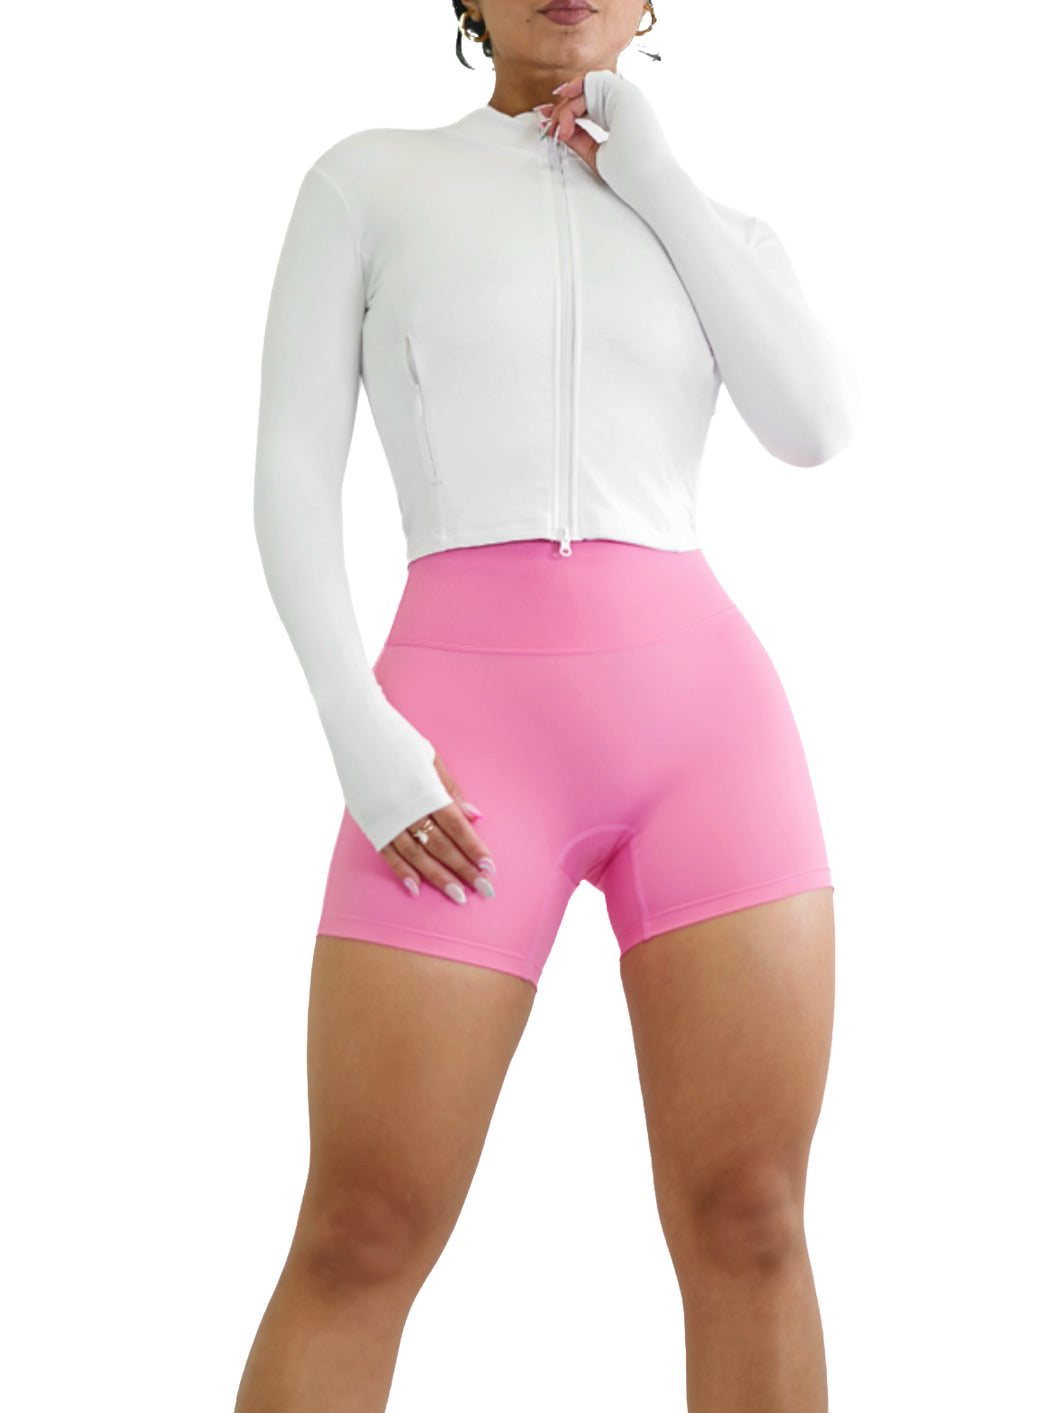 Fitted BBL Compression Jacket (Red Velvet) – Fitness Fashioness